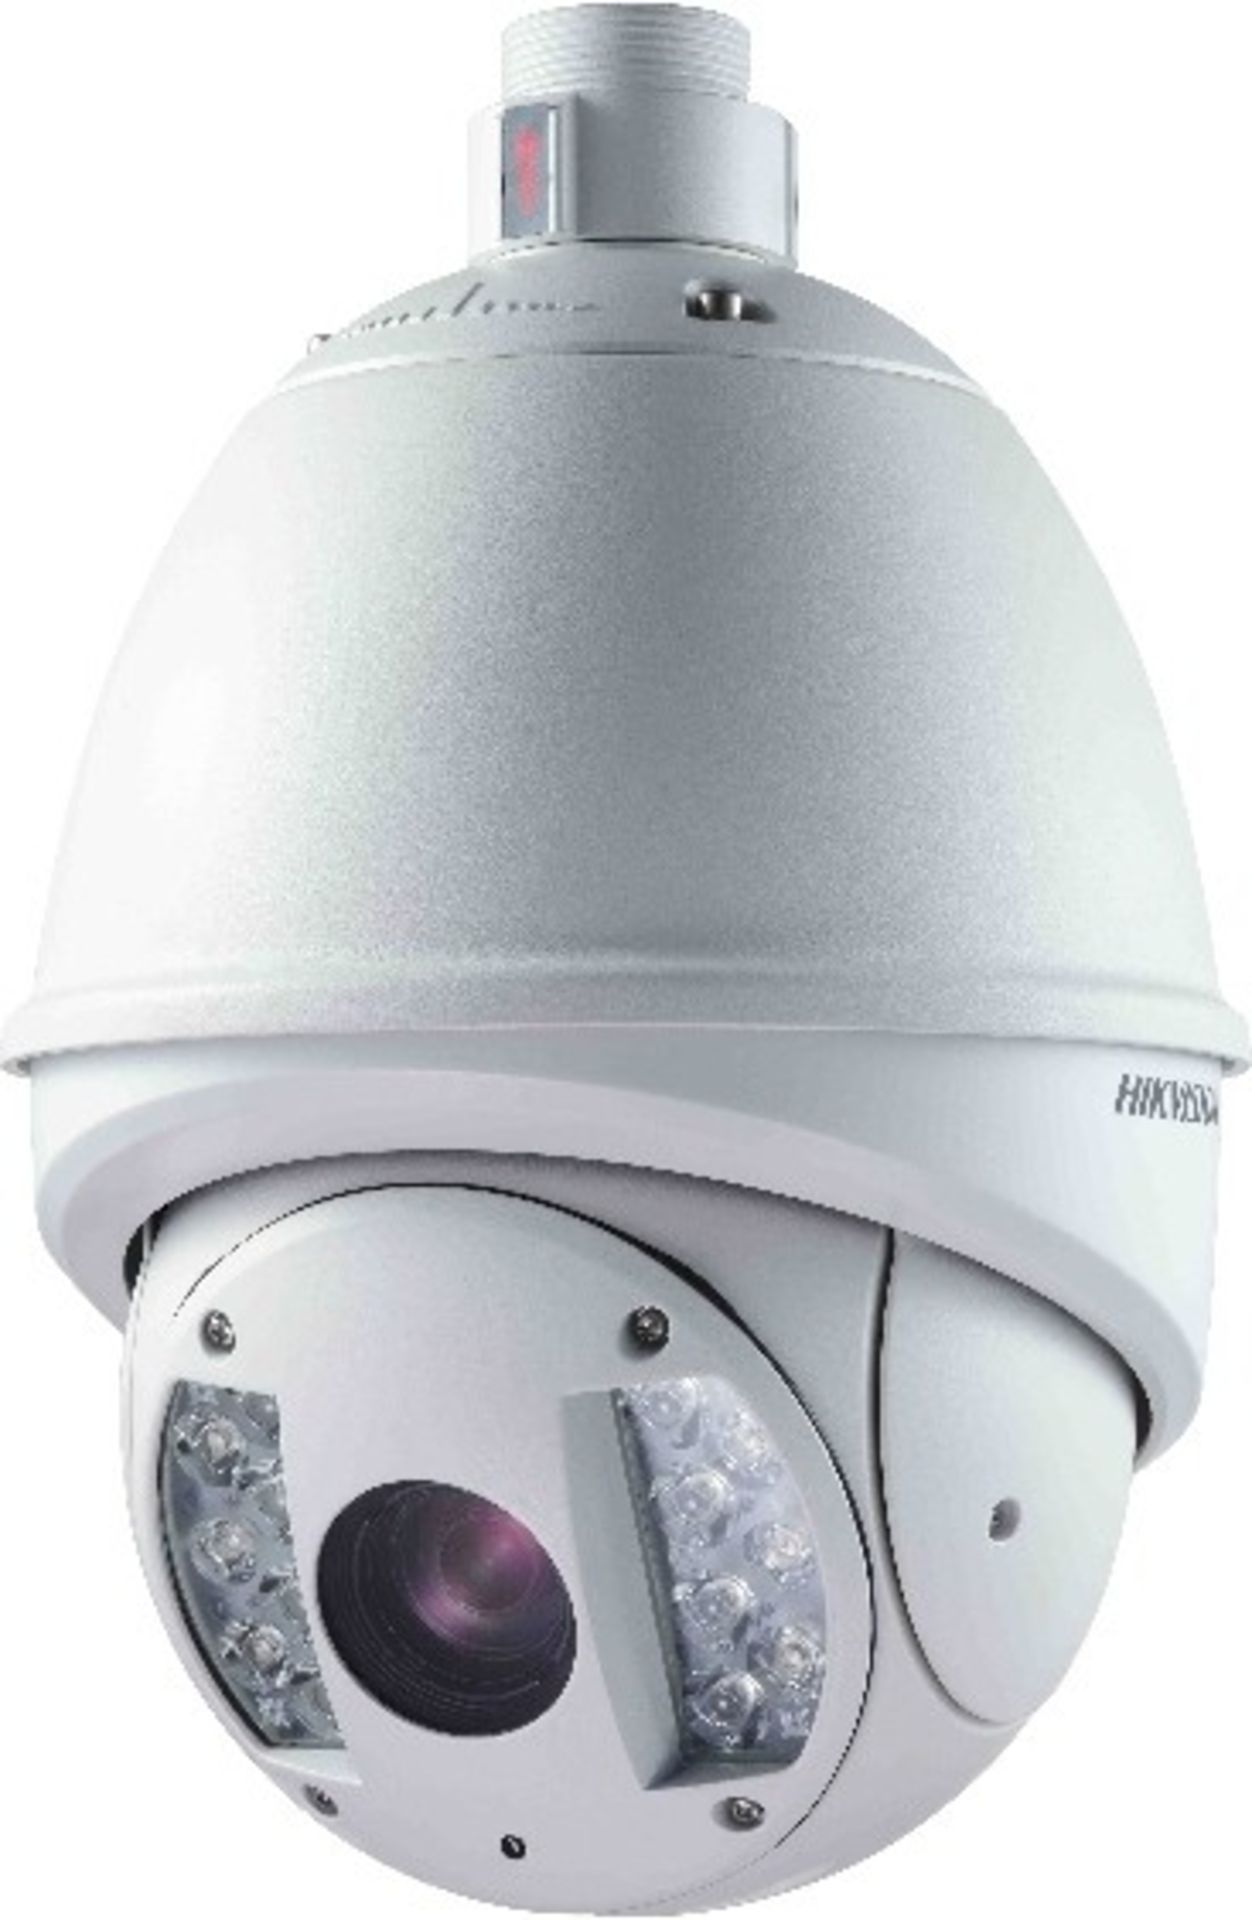 1 x Hikvision Digital Technology DS-2DF7284-A -Ê2MP IR Network PTZ Camera - RRP £2000 plus - New in - Image 2 of 2